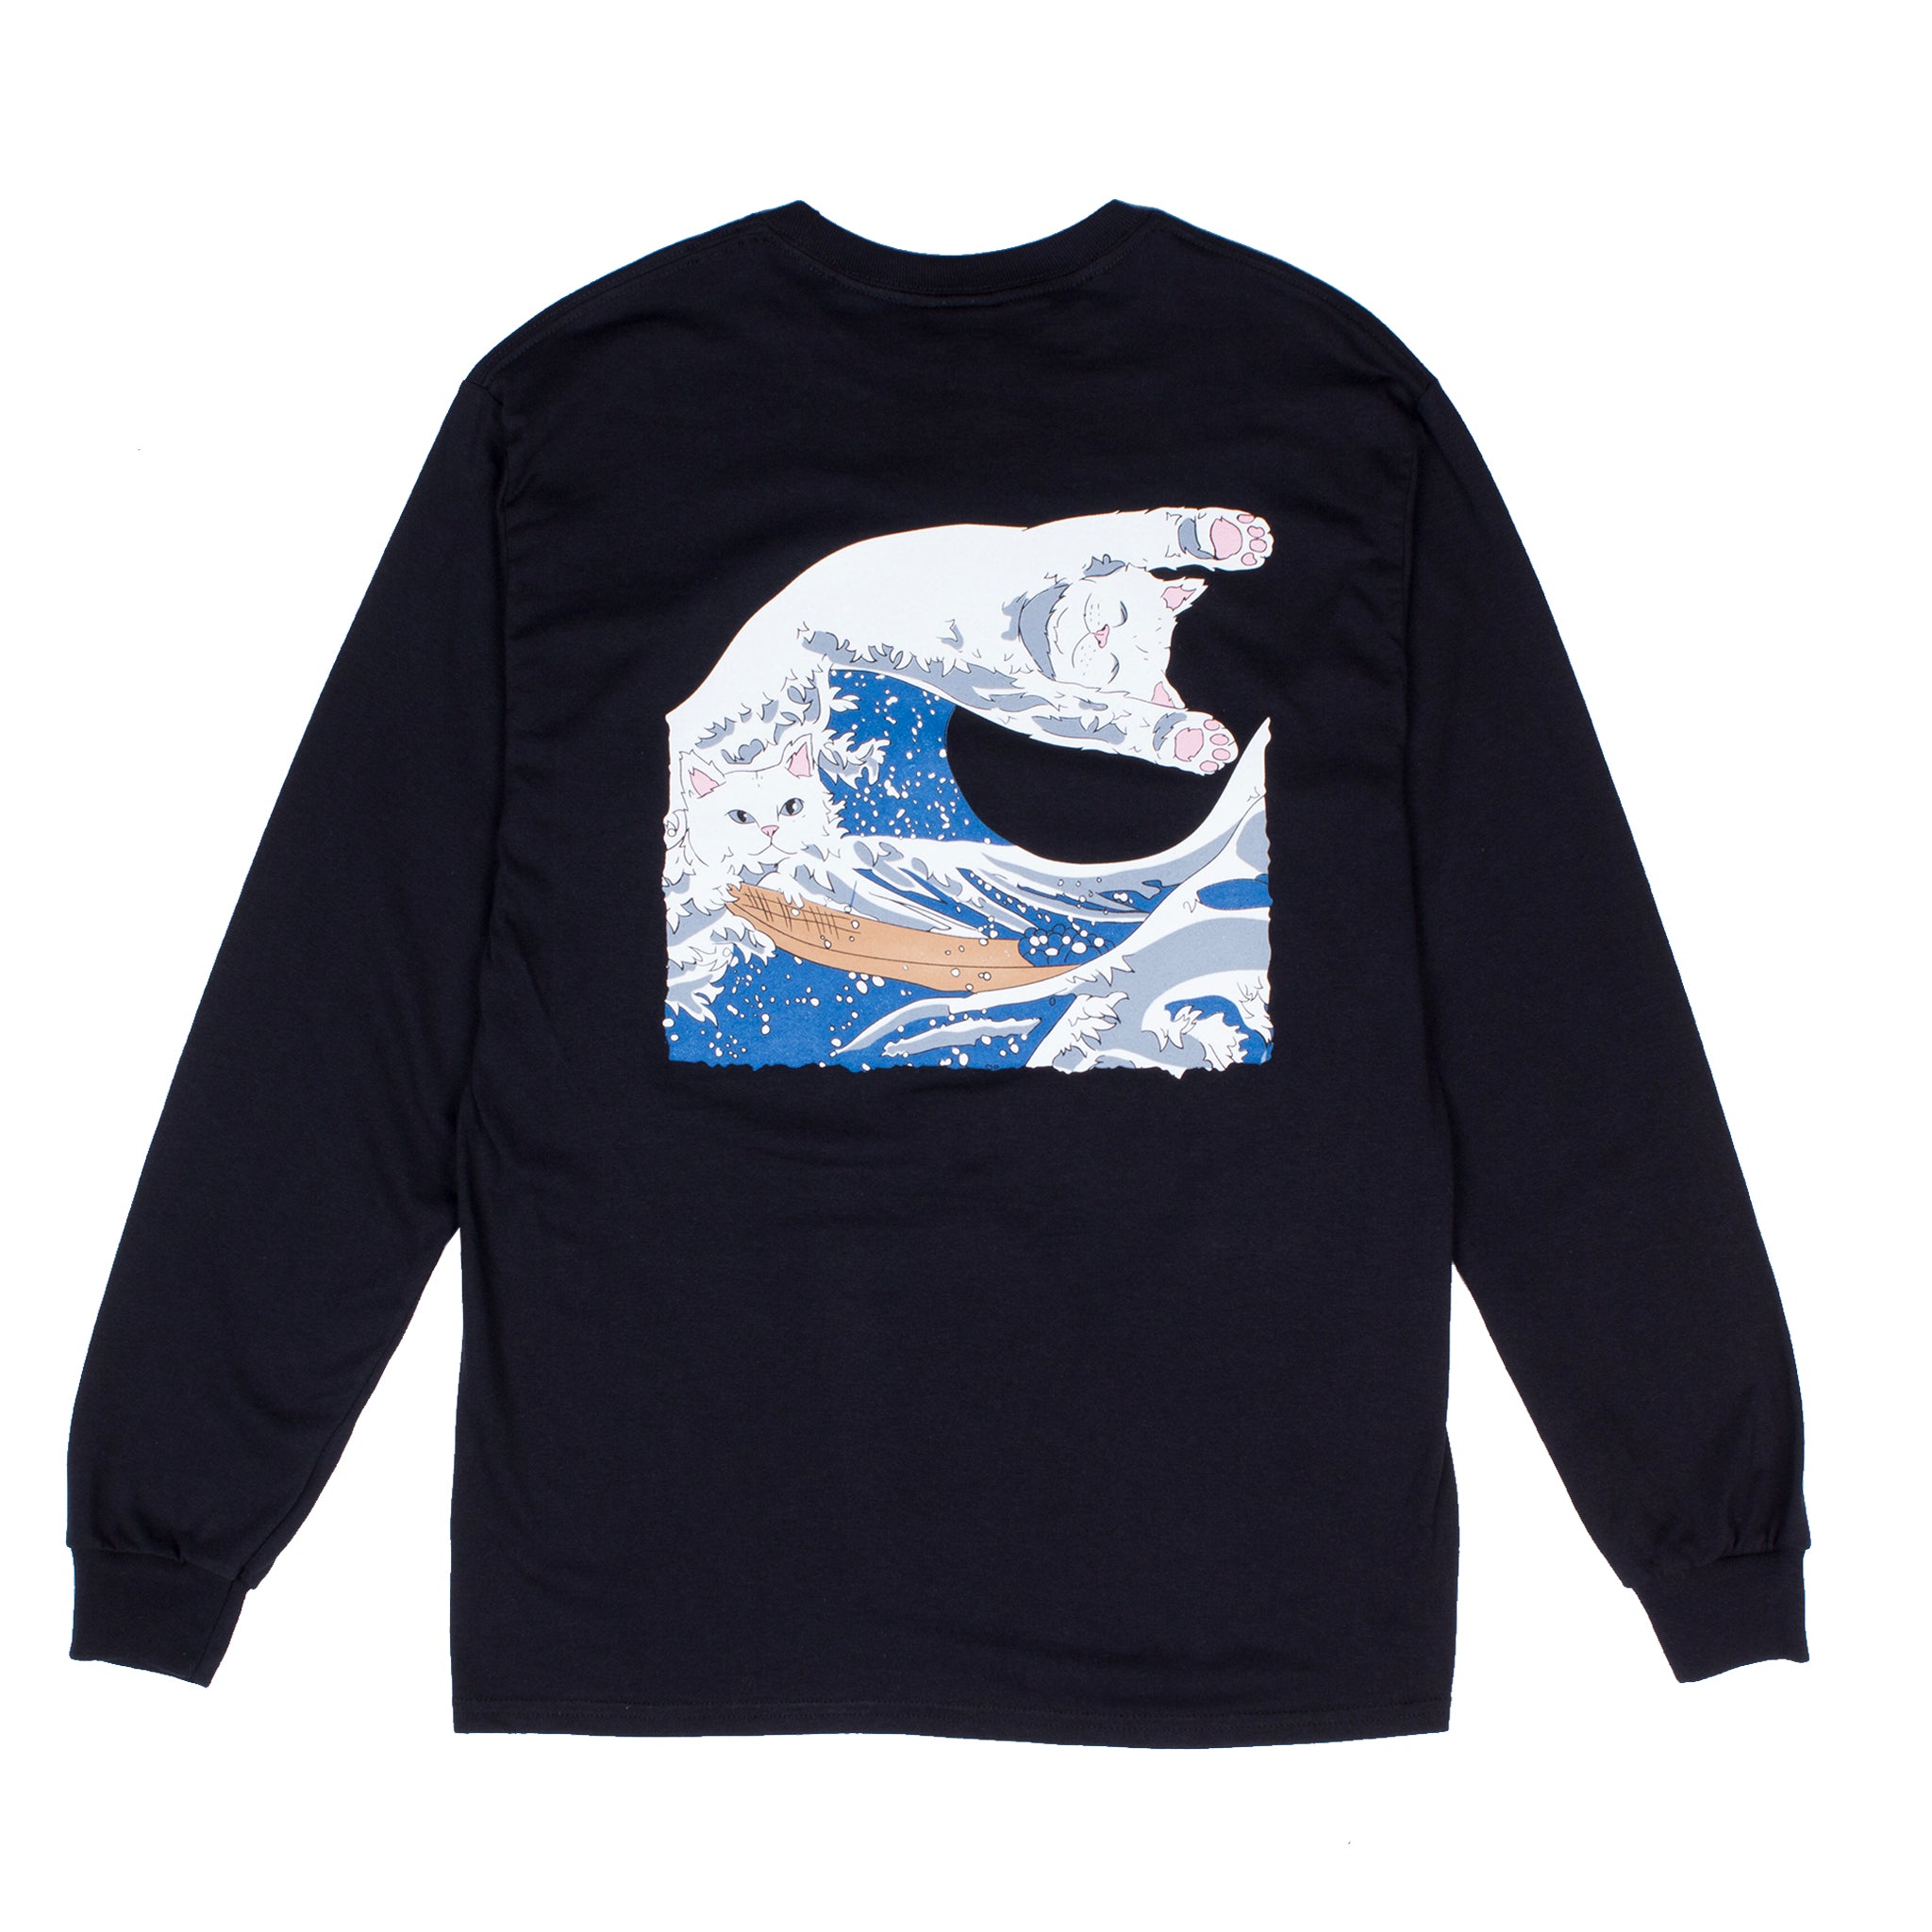 The Great Wave Of Nerm Long Sleeve (Black)